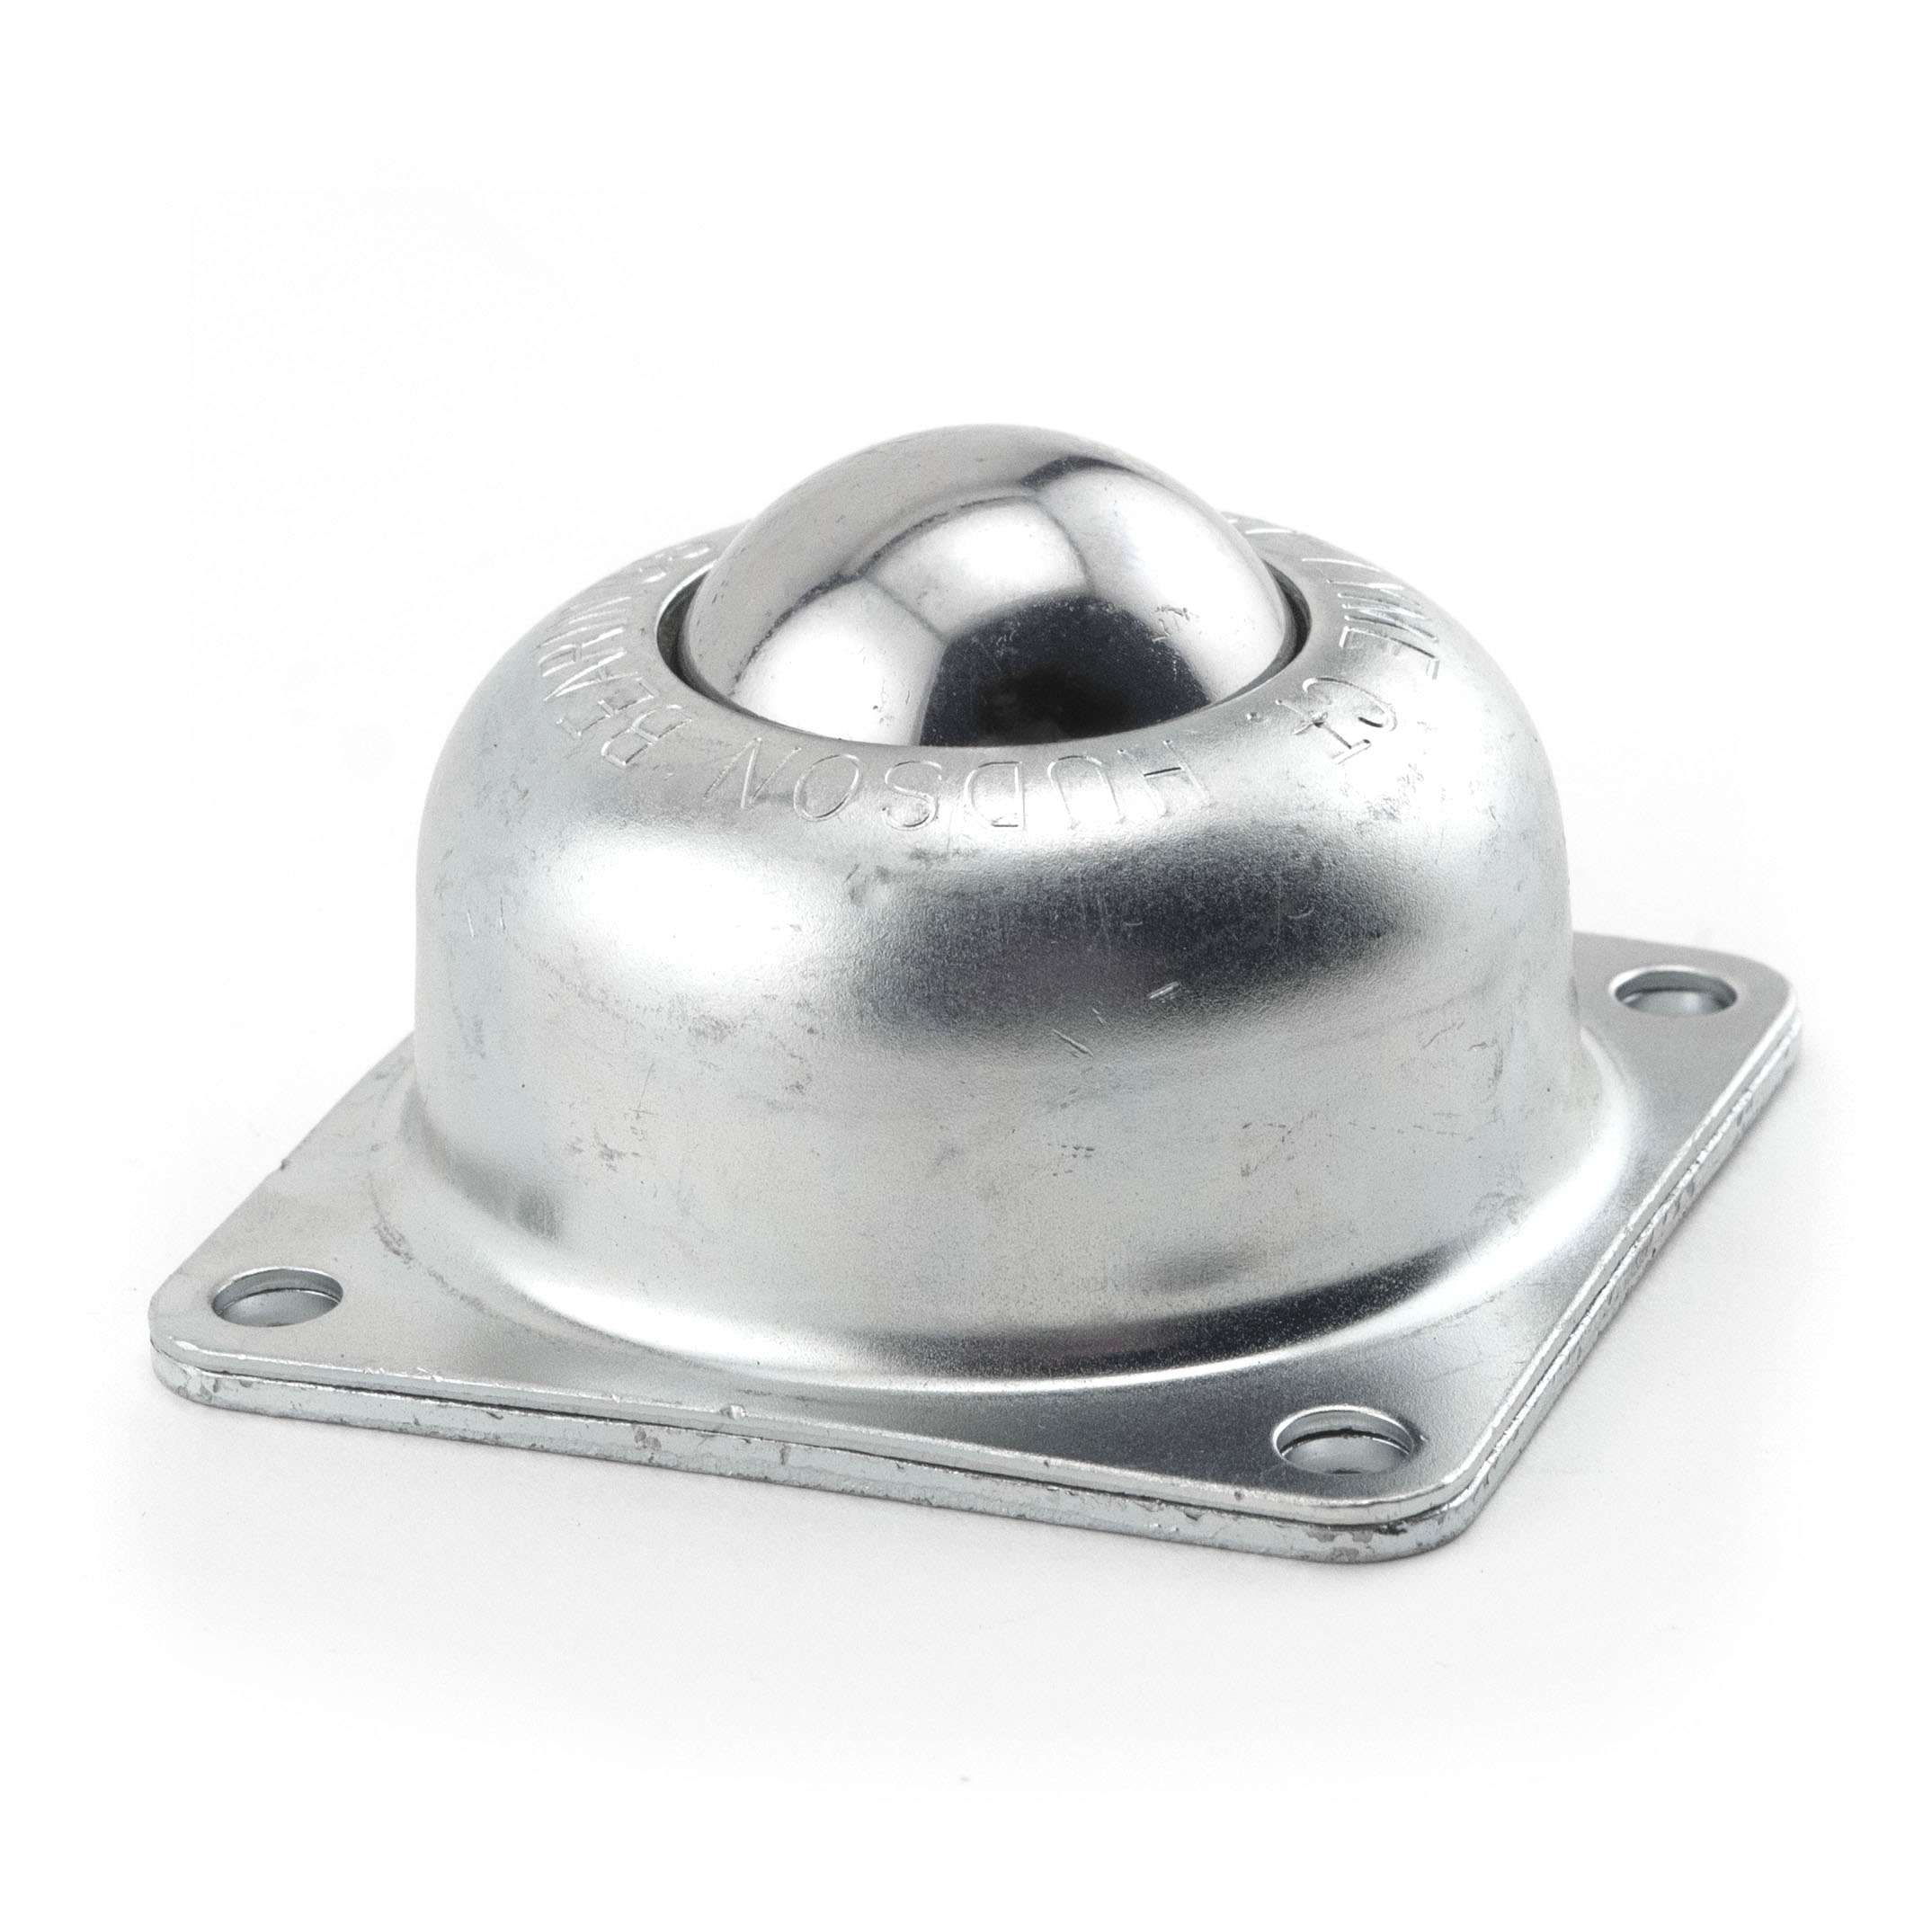 Ball Transfer; 1-1/2"; carbon steel ball; carbon steel flange (3"x3"; holes: 2-7/16"x2-7/16"; 1/4" bolt); 250#; 1-13/16" load height (Item #89367)